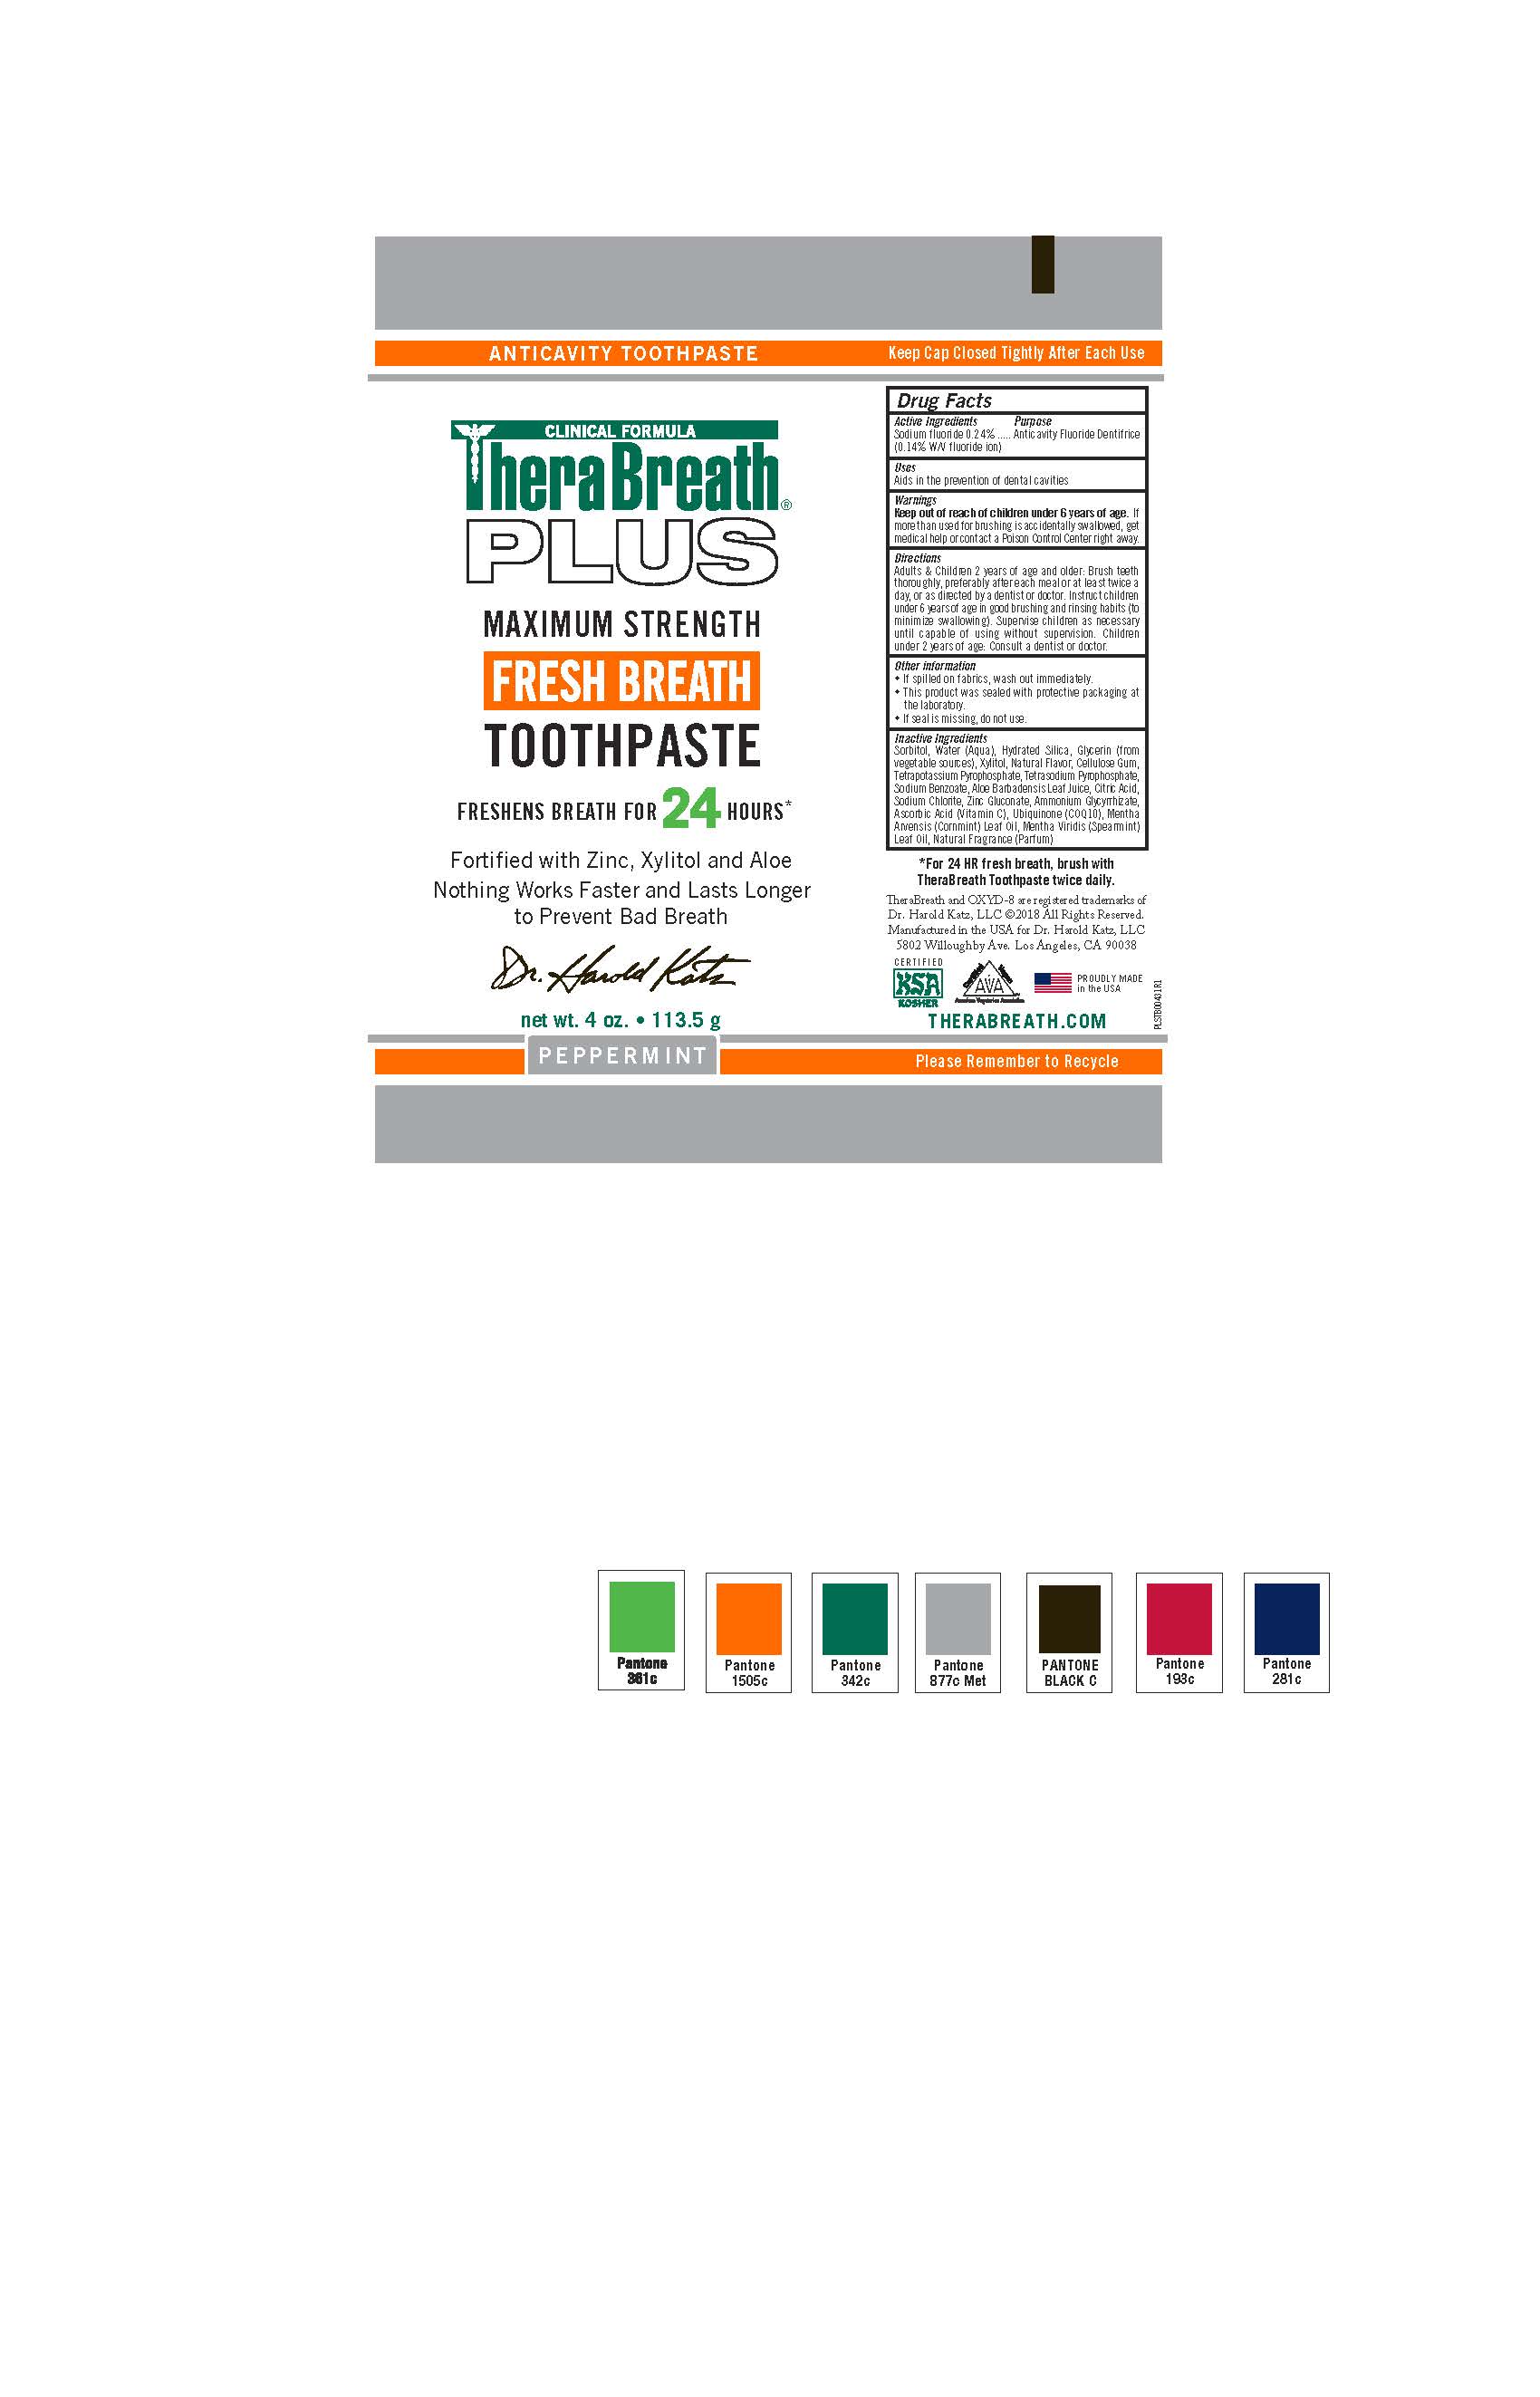 TheraBreath Dentist Recommended Fresh Breath Toothpaste, 4 oz 